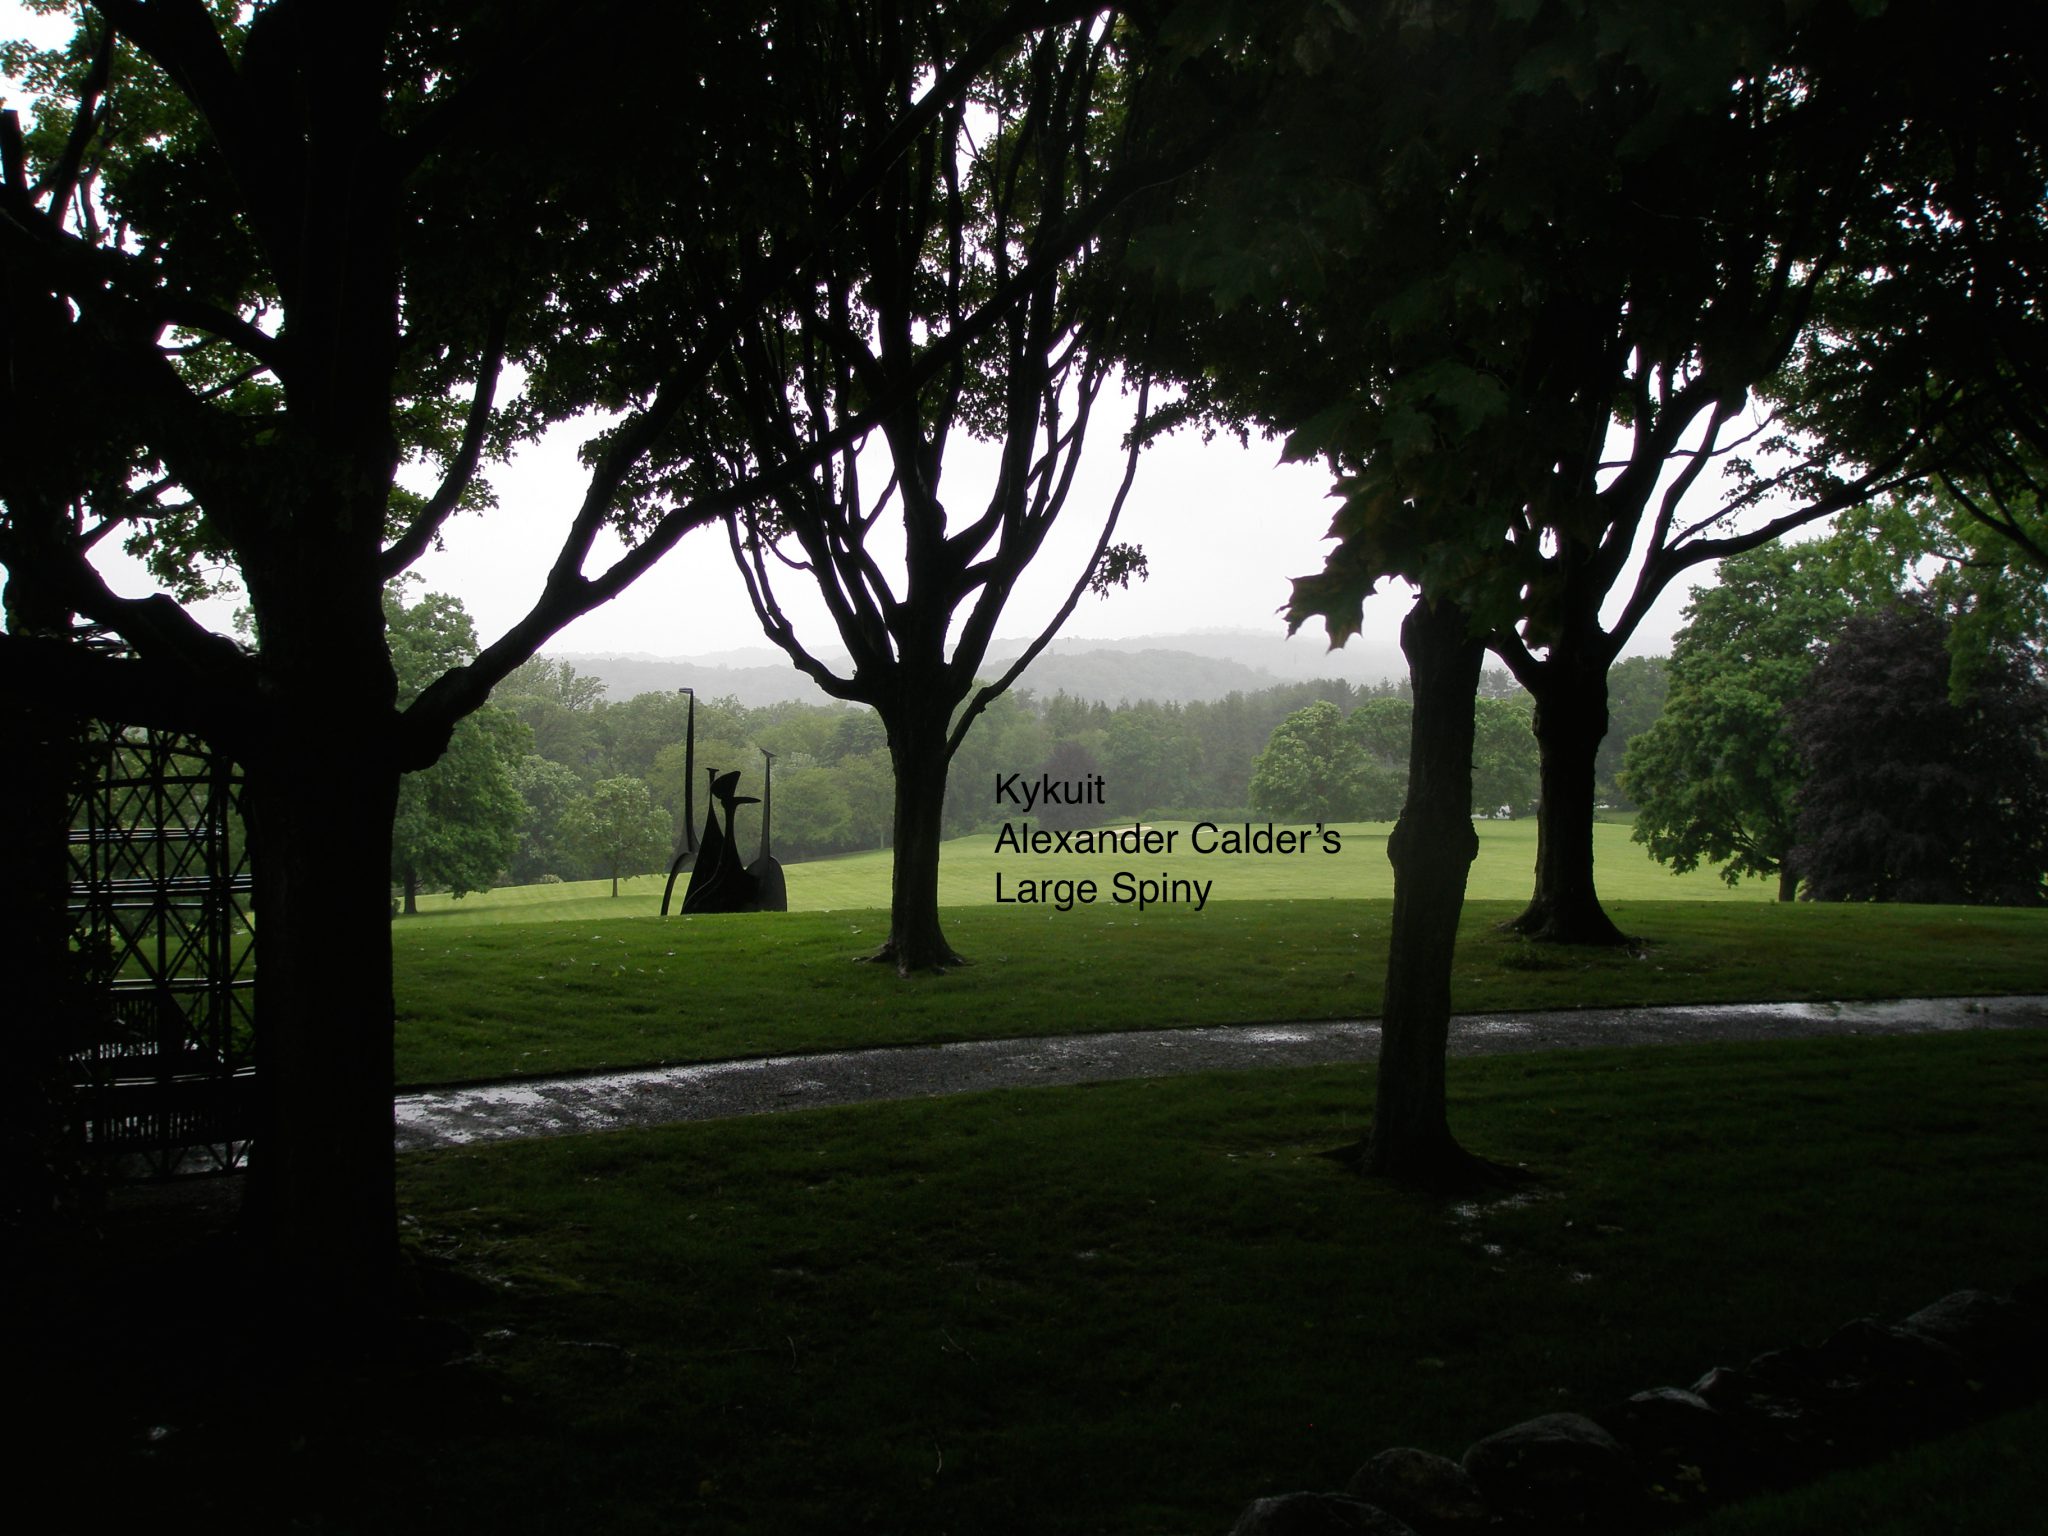 And in 1966, the most artfully-sited piece of all was placed below the Maple Walk. I took this picture in early June of 2013, during a violent rainstorm, and the silhouettes of the wet tree trunks combined with the Calder sculpture were wonderful.